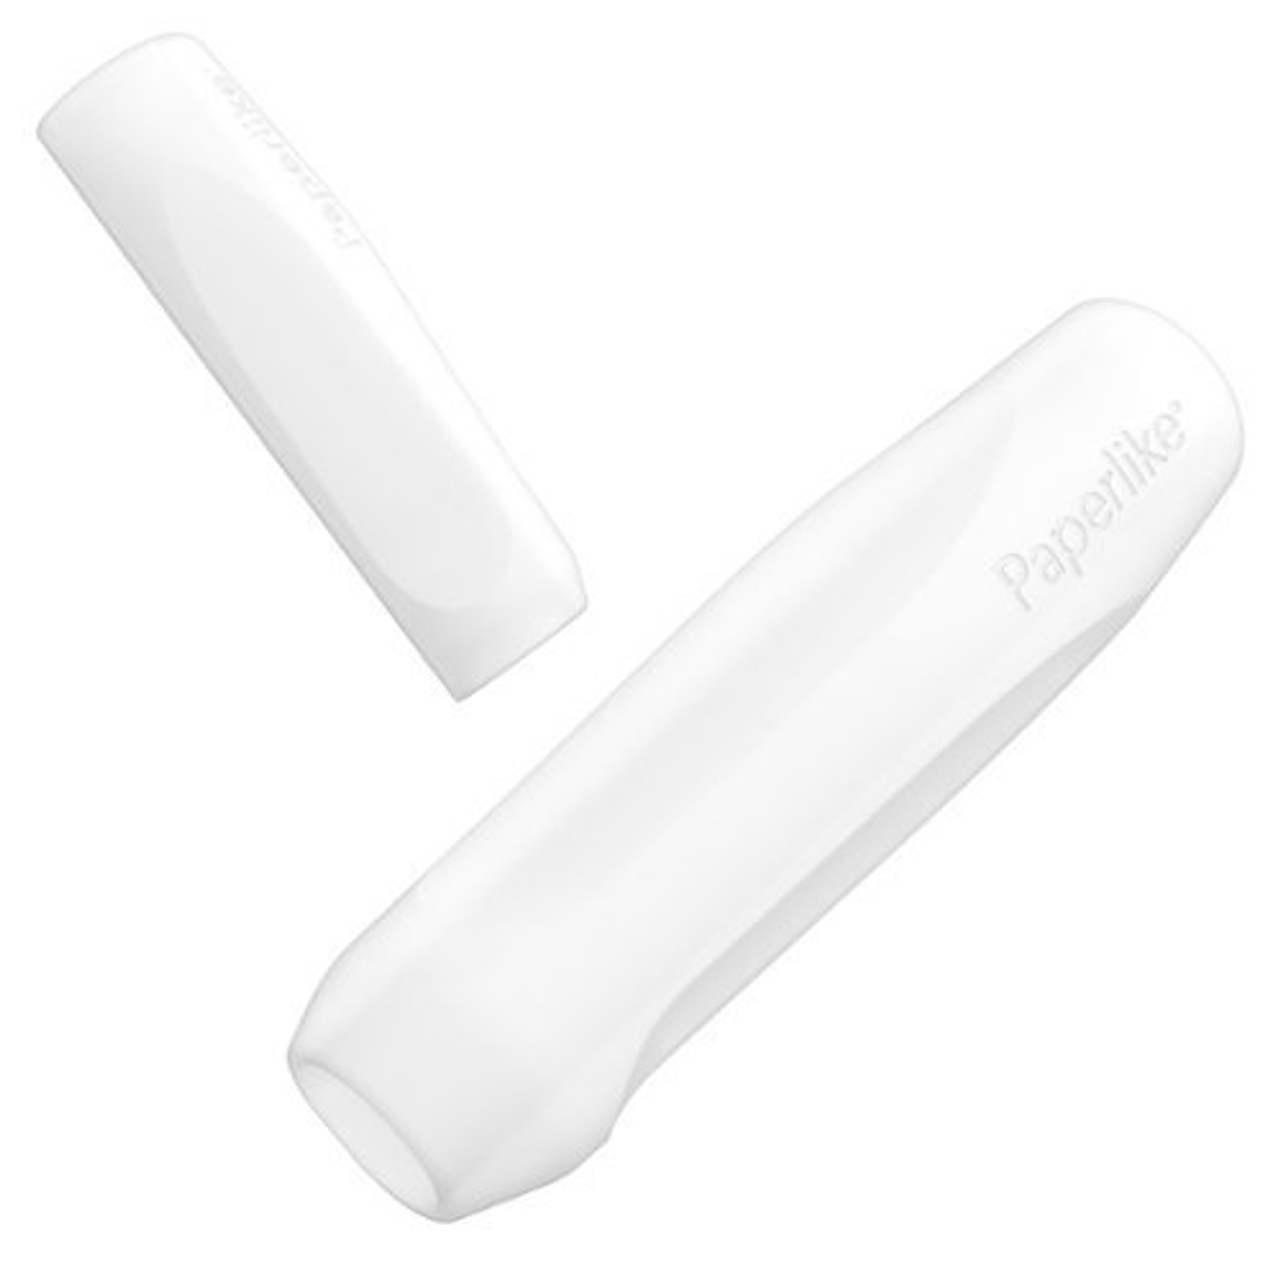 Paperlike - Pencil Grips for Apple Pencil - White